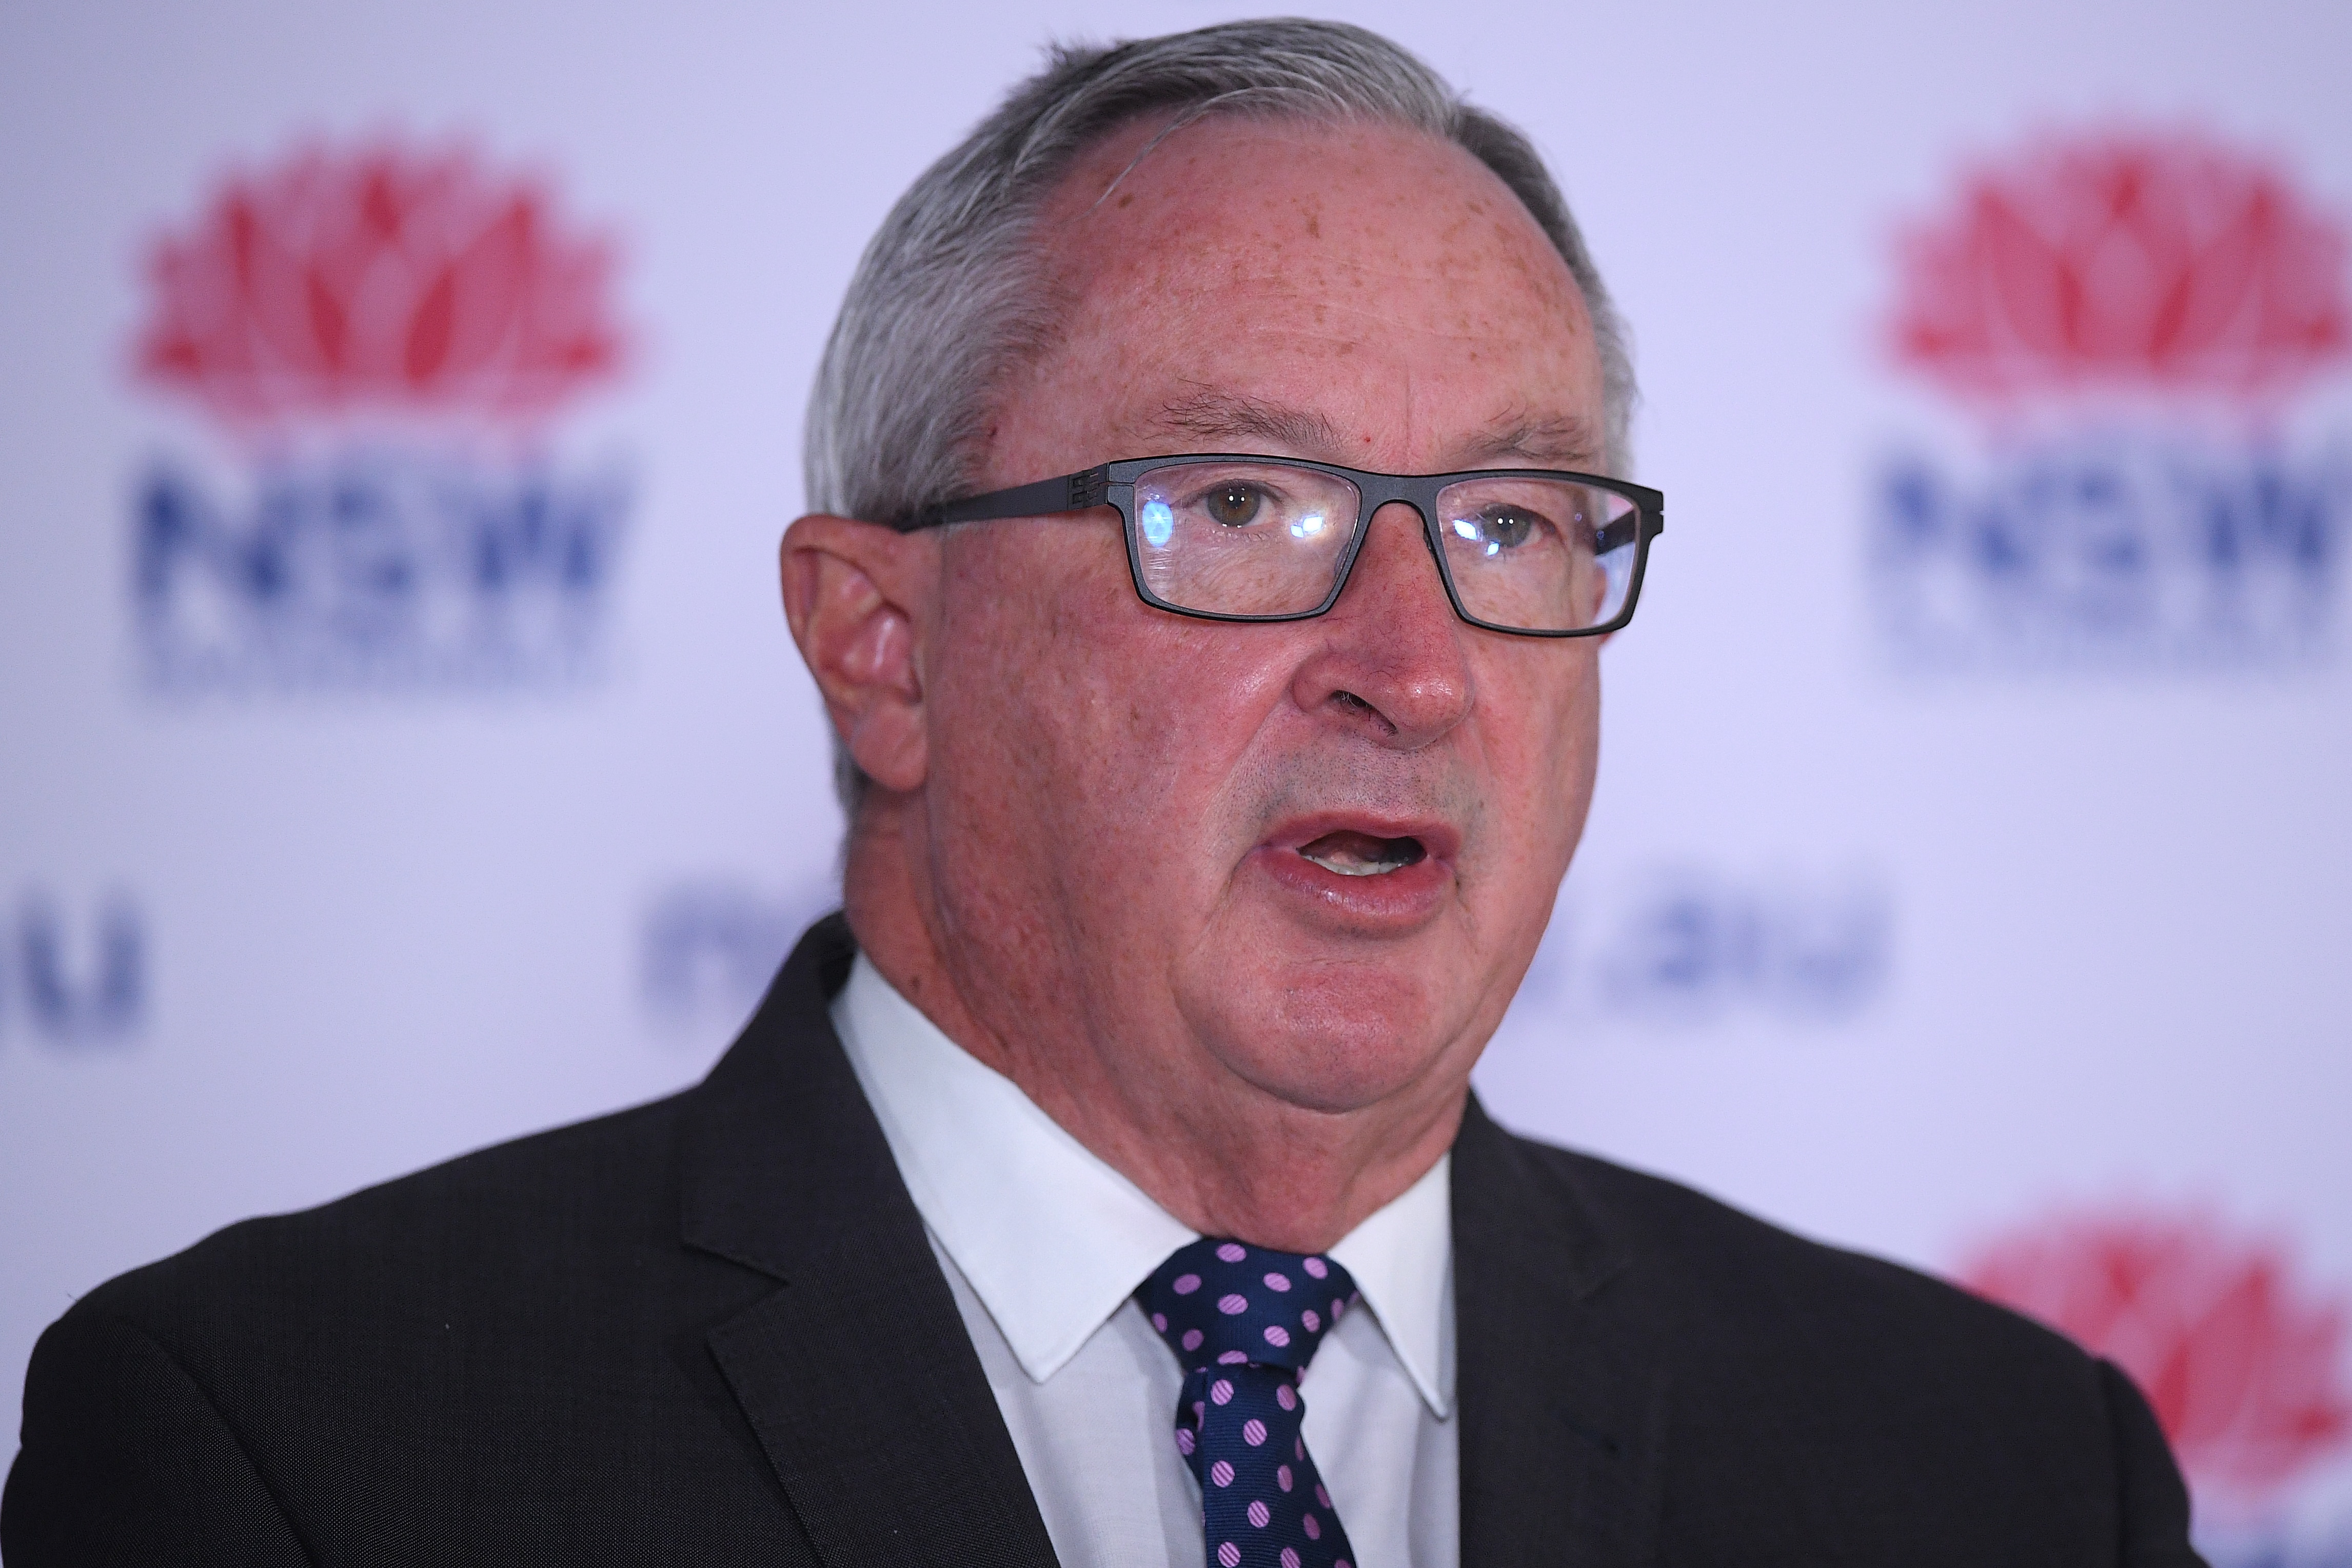 NSW Health Minister Brad Hazzard addresses media during a press conference in Sydney, Tuesday, August 31, 2021